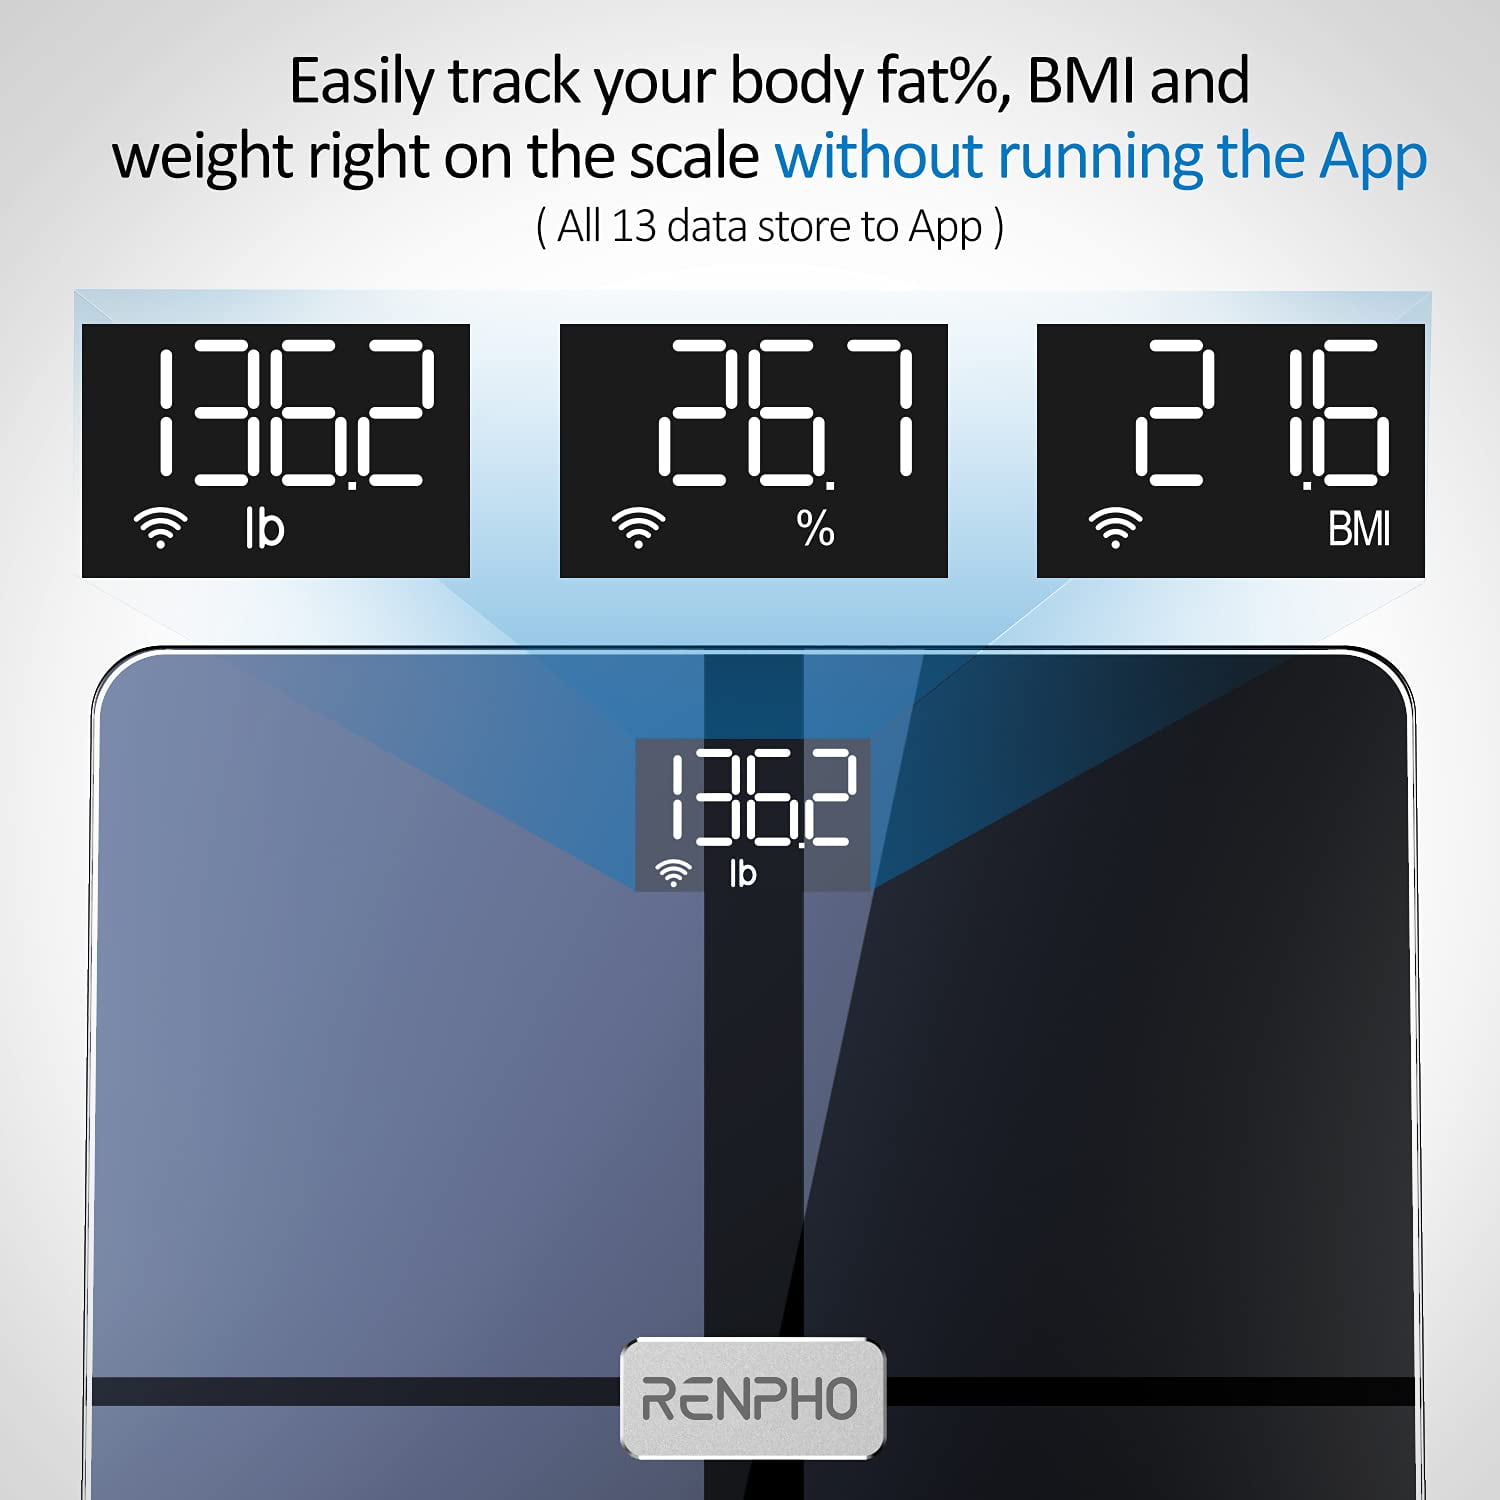 Another #RENPHOhealthhero submission! This time: RENPHO Smart Body Fat